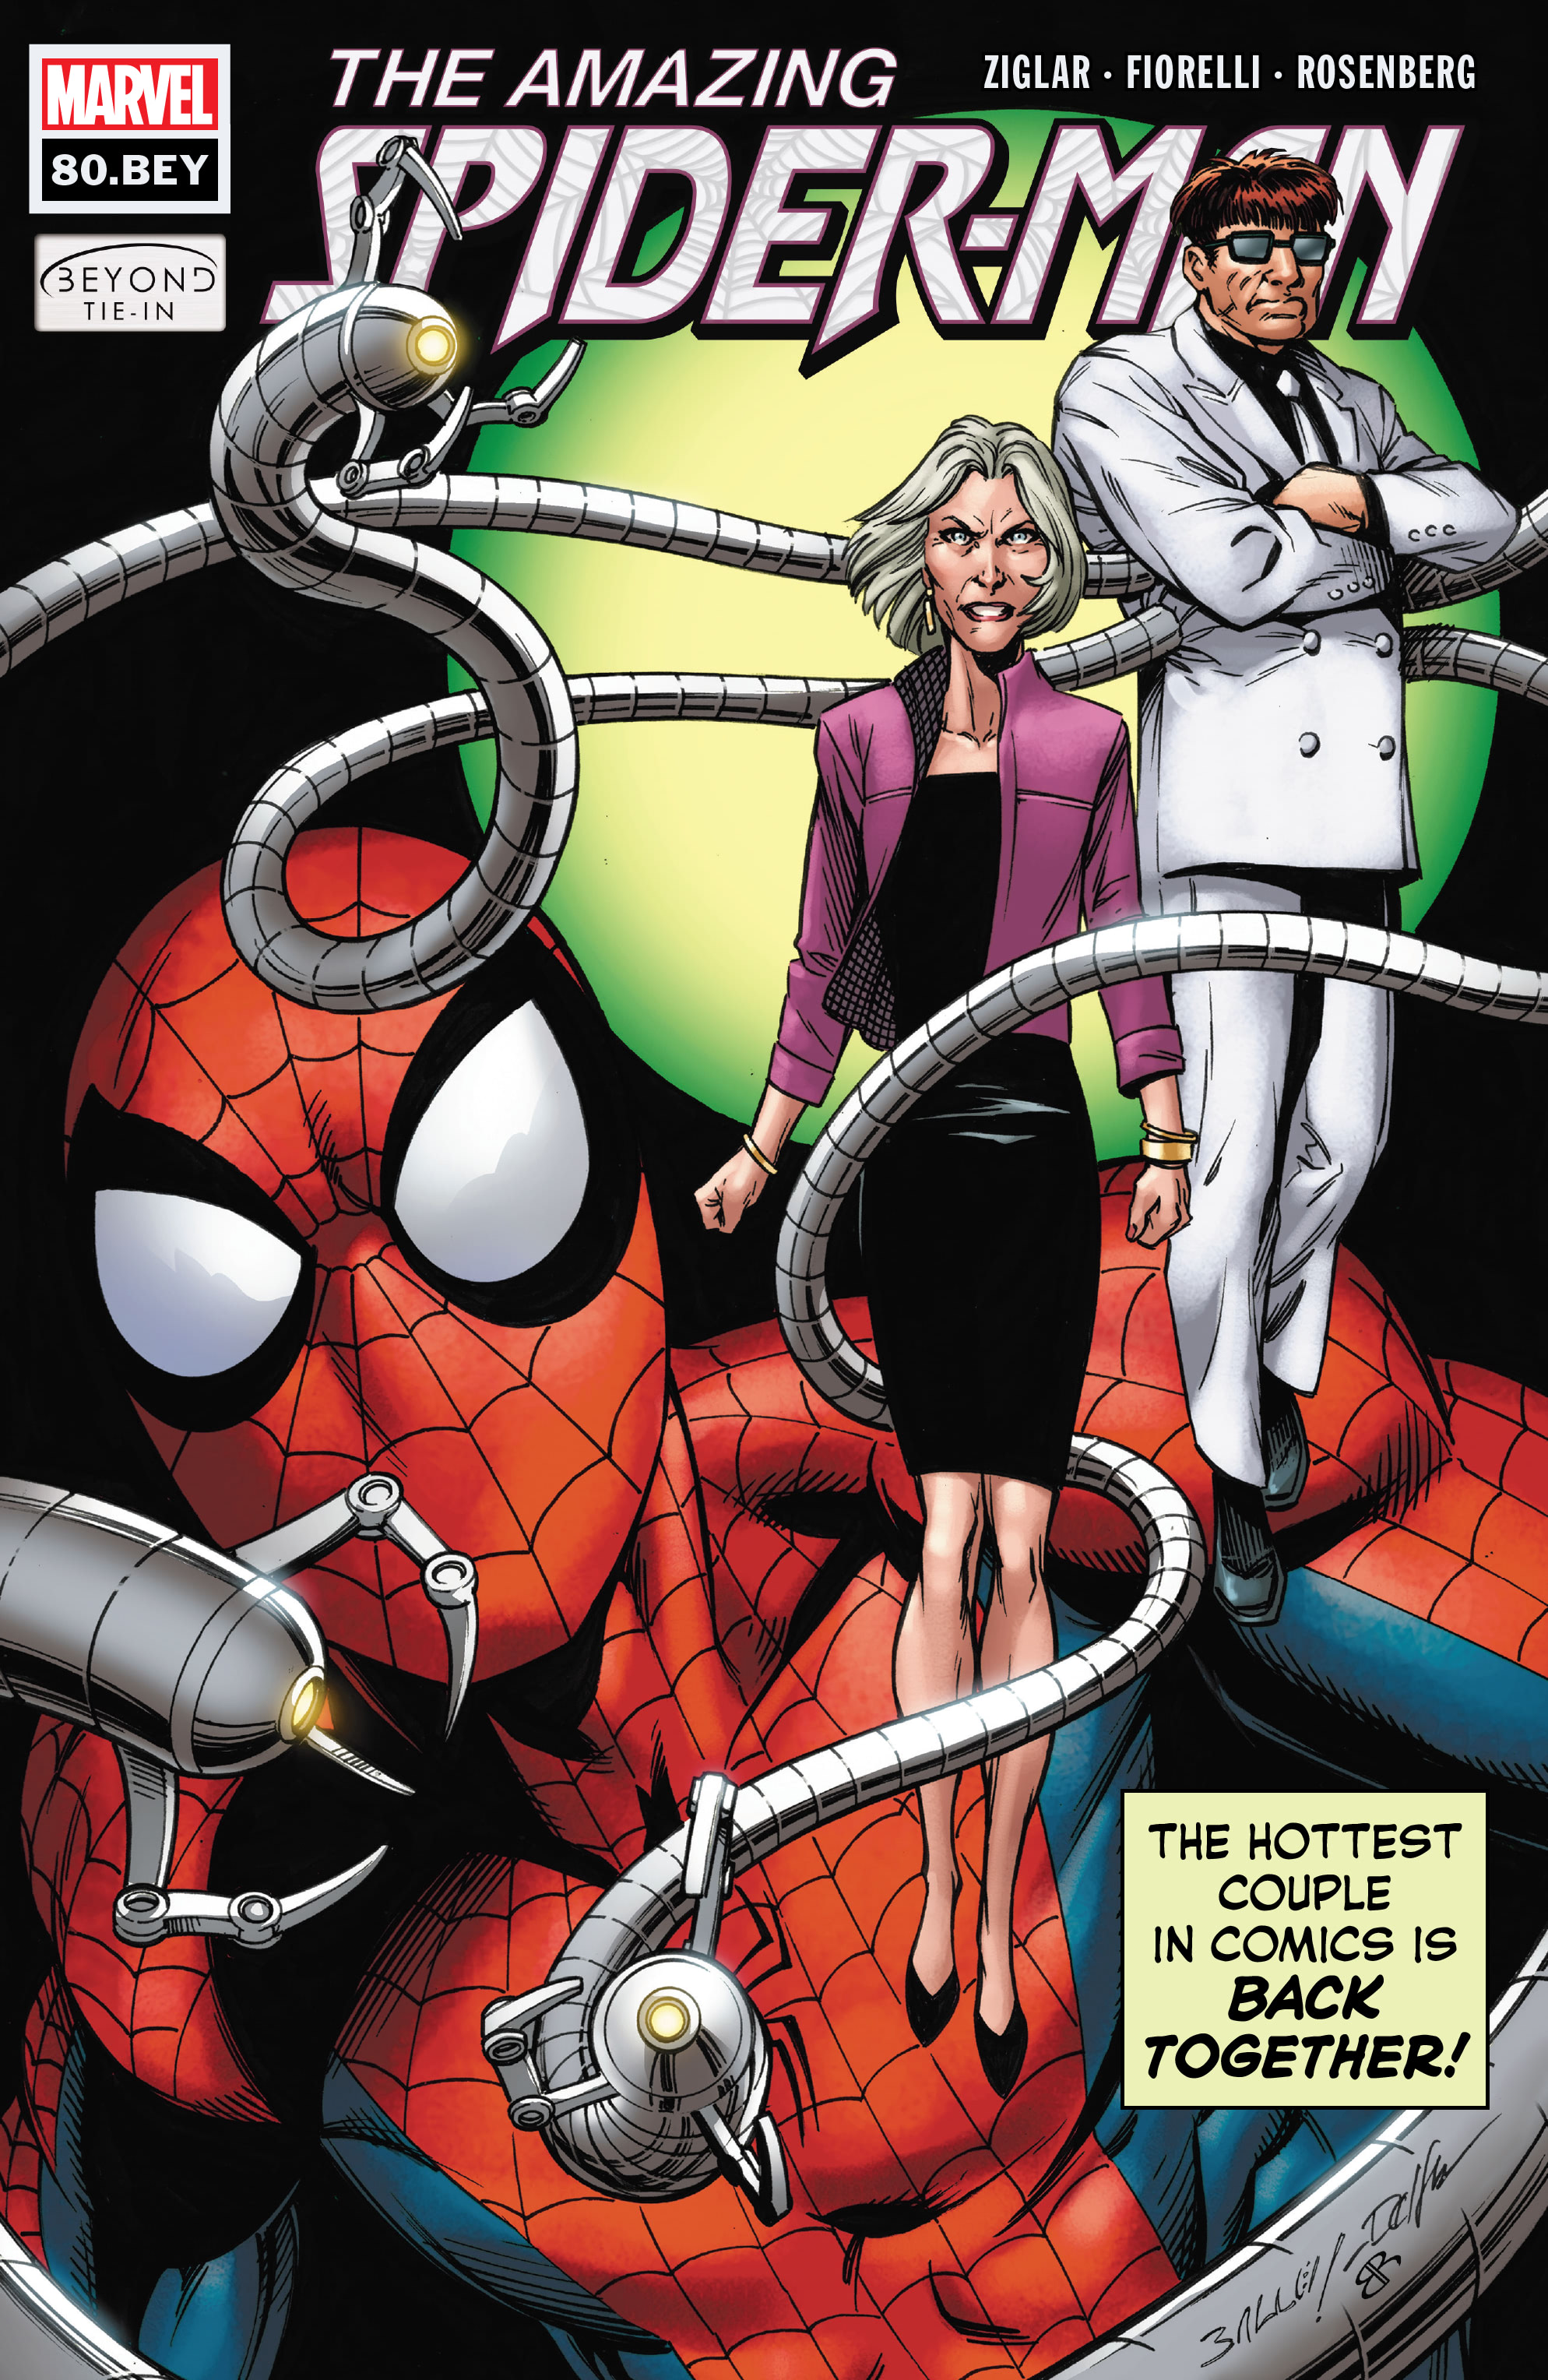 Amazing Spider-Man (2018-): Chapter 80.BEY - Page 1